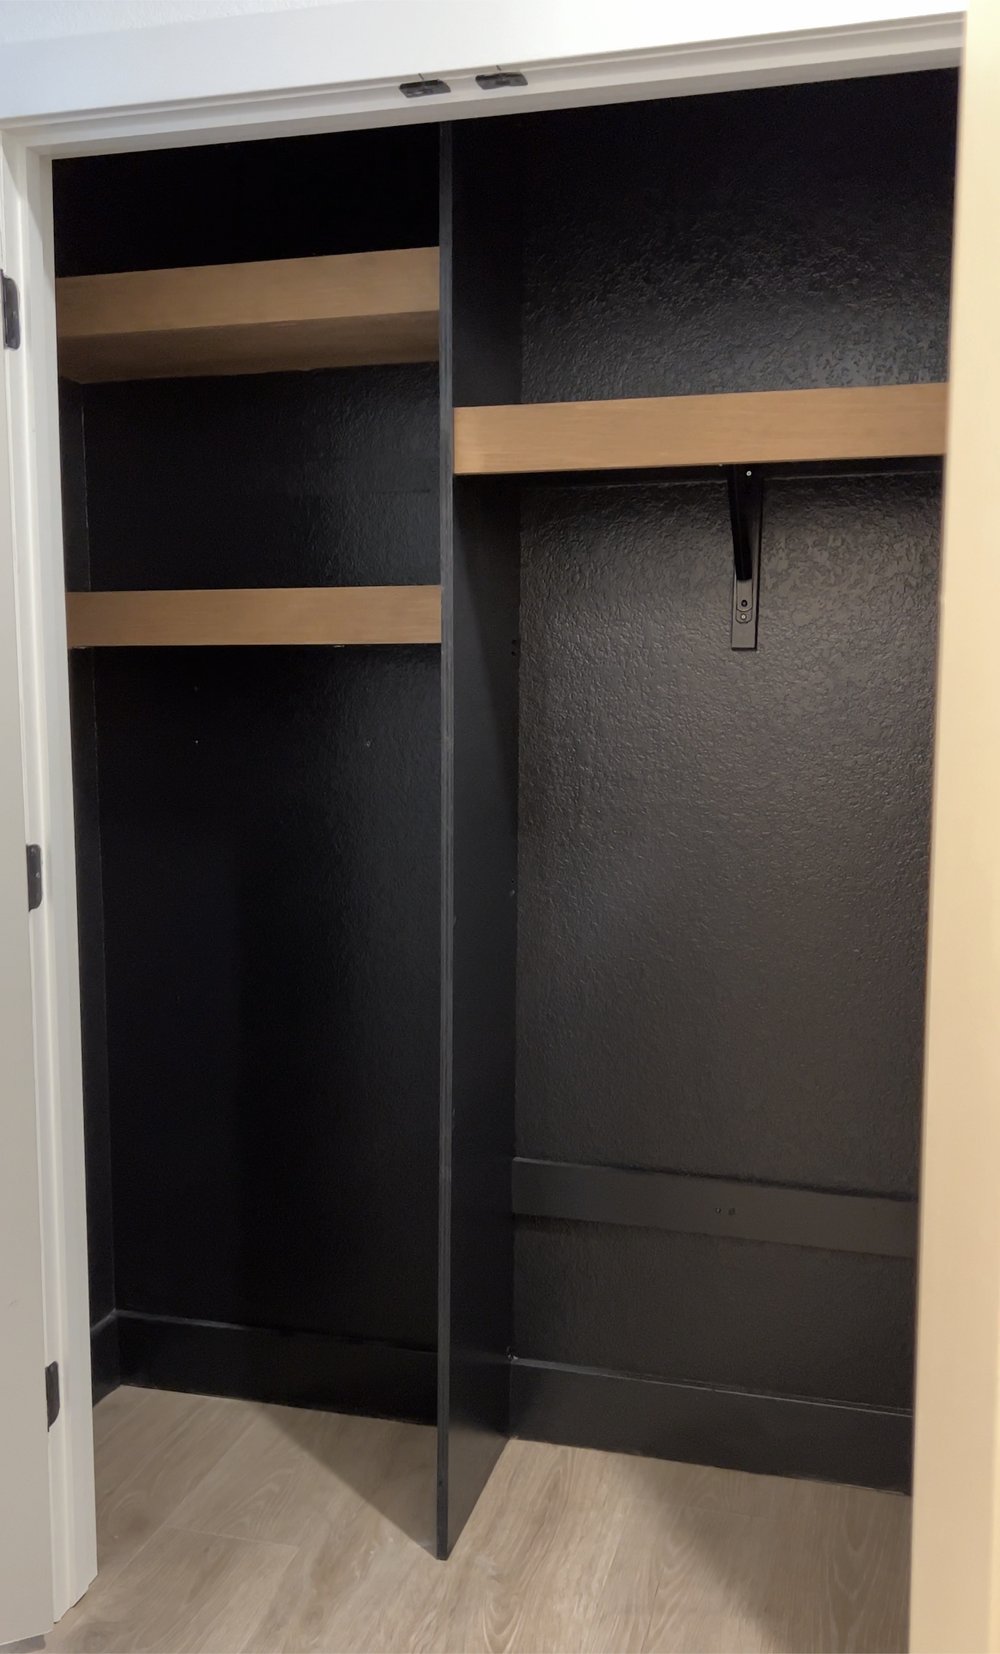 final closet design, empty with floating shelves